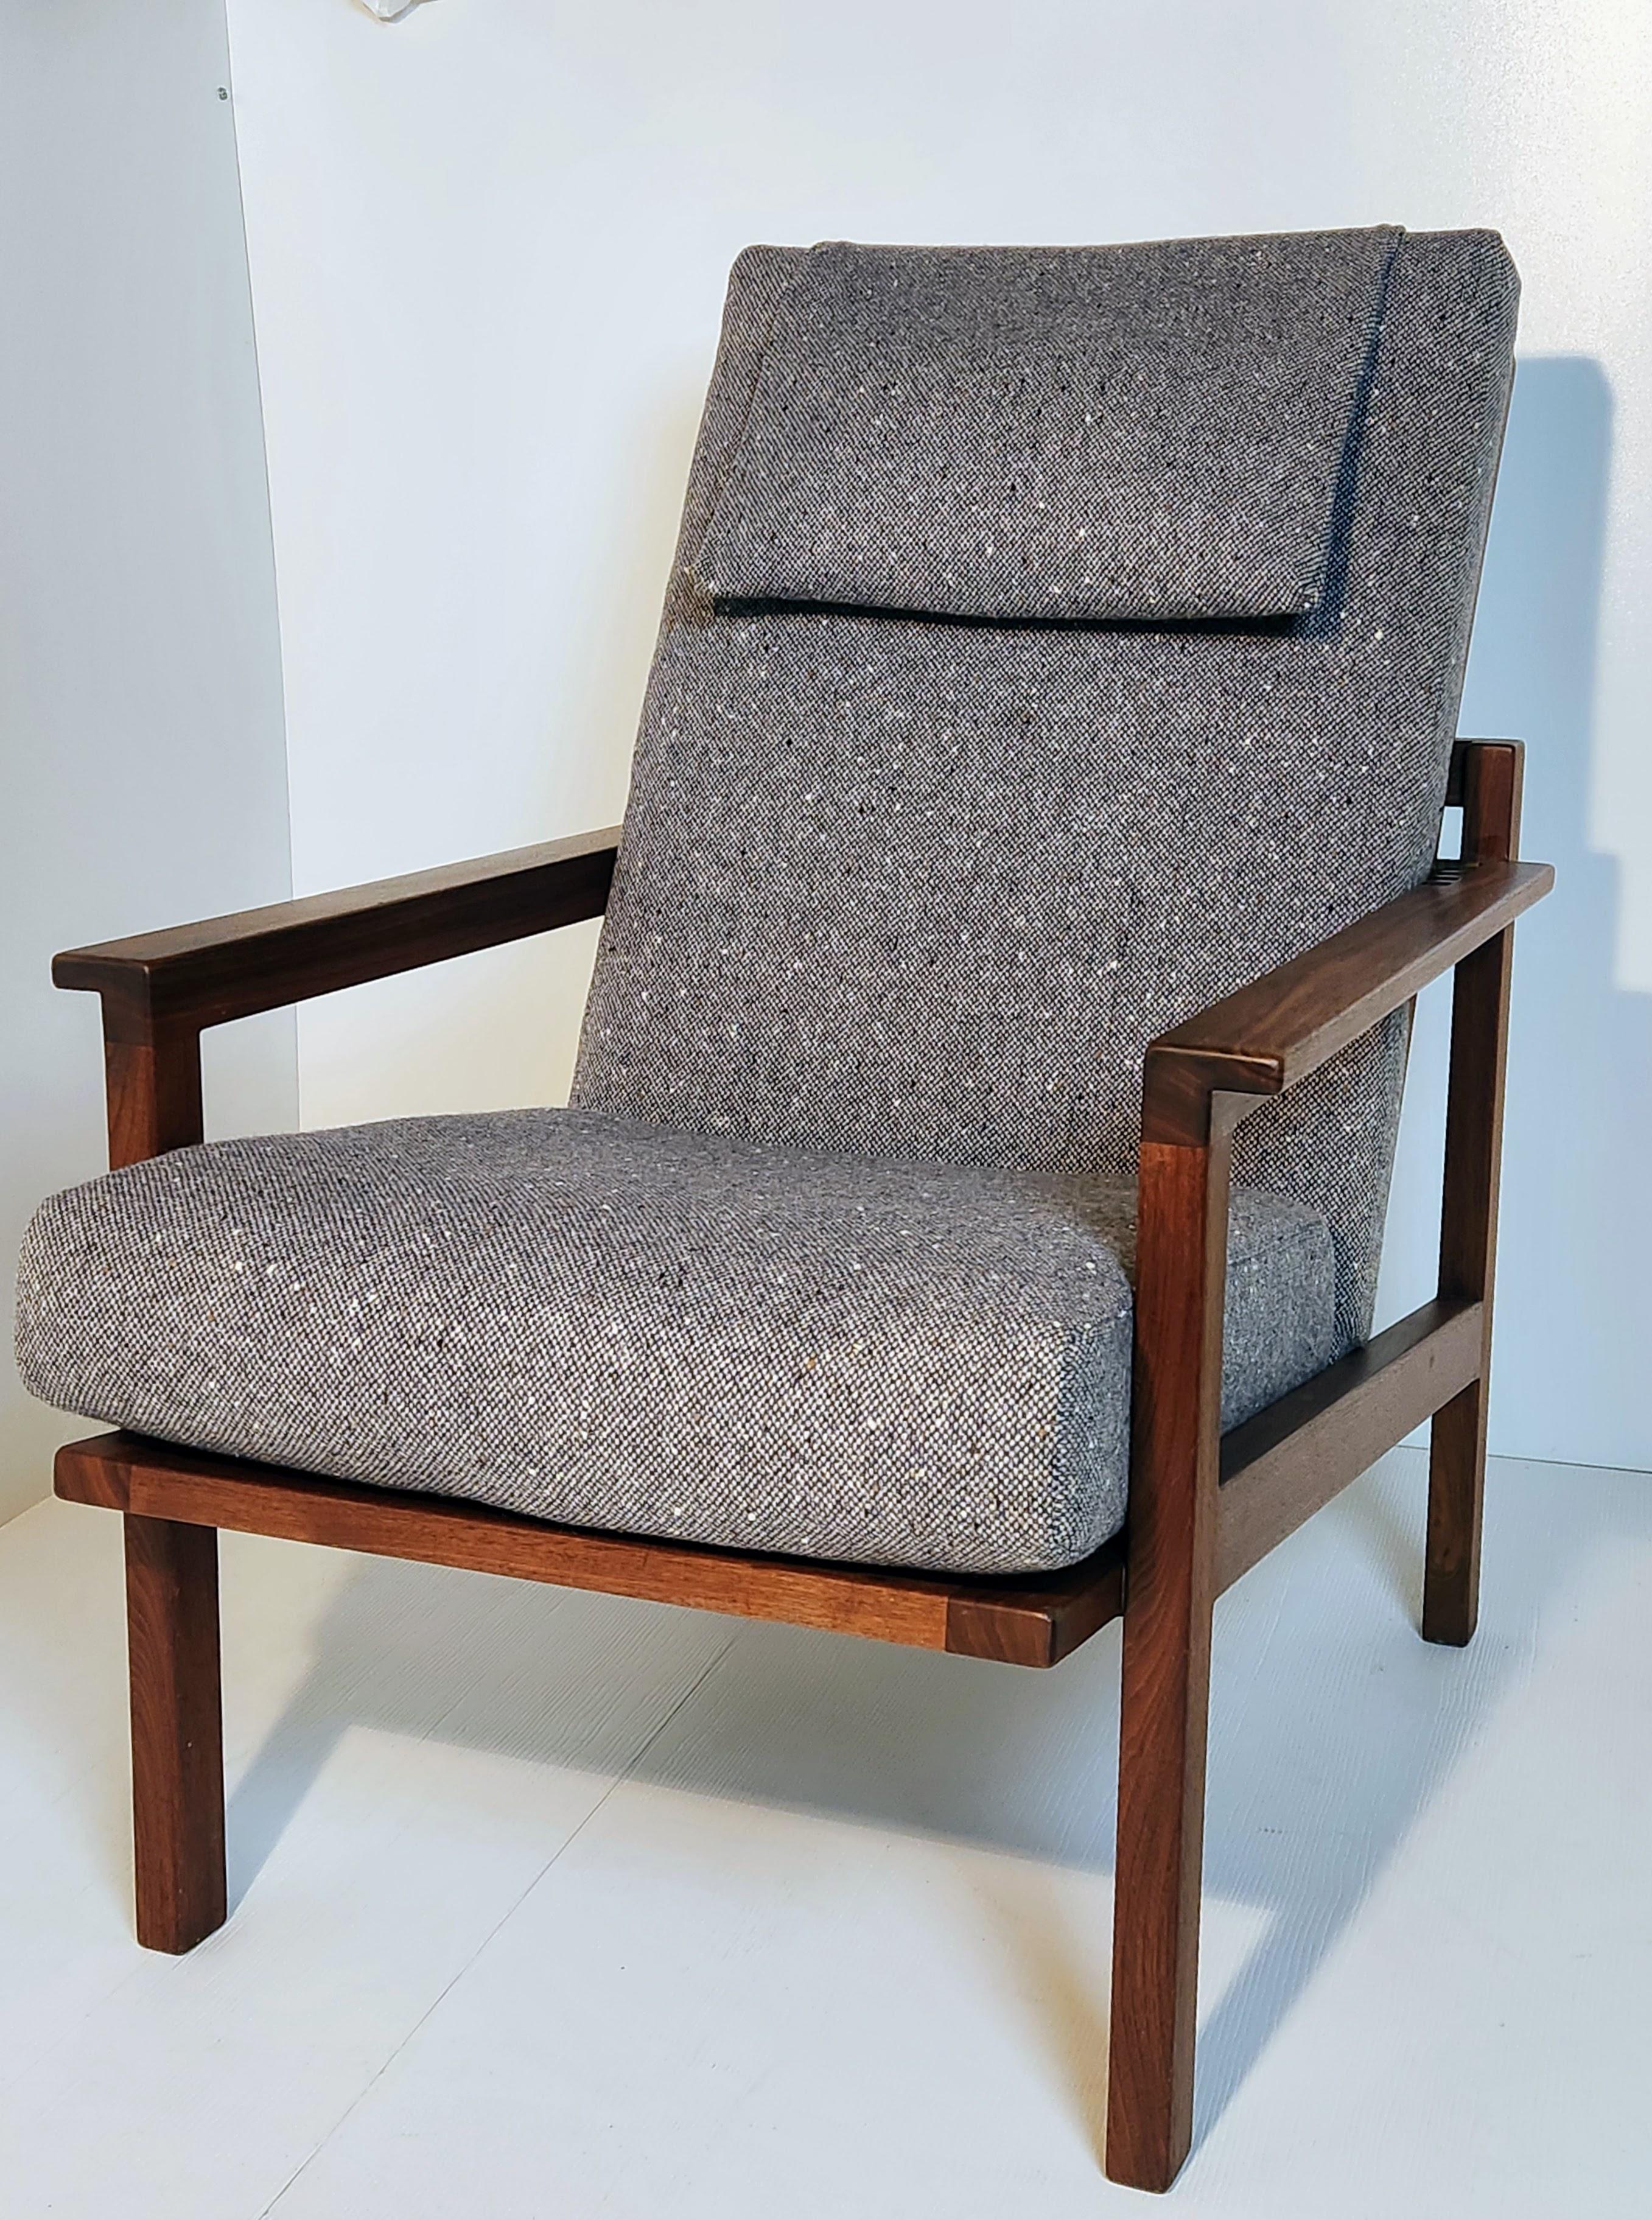 Walnut Adjustable Lounge Chair Arden Riddle (1921-2011) pre-1965 In Good Condition For Sale In Camden, ME